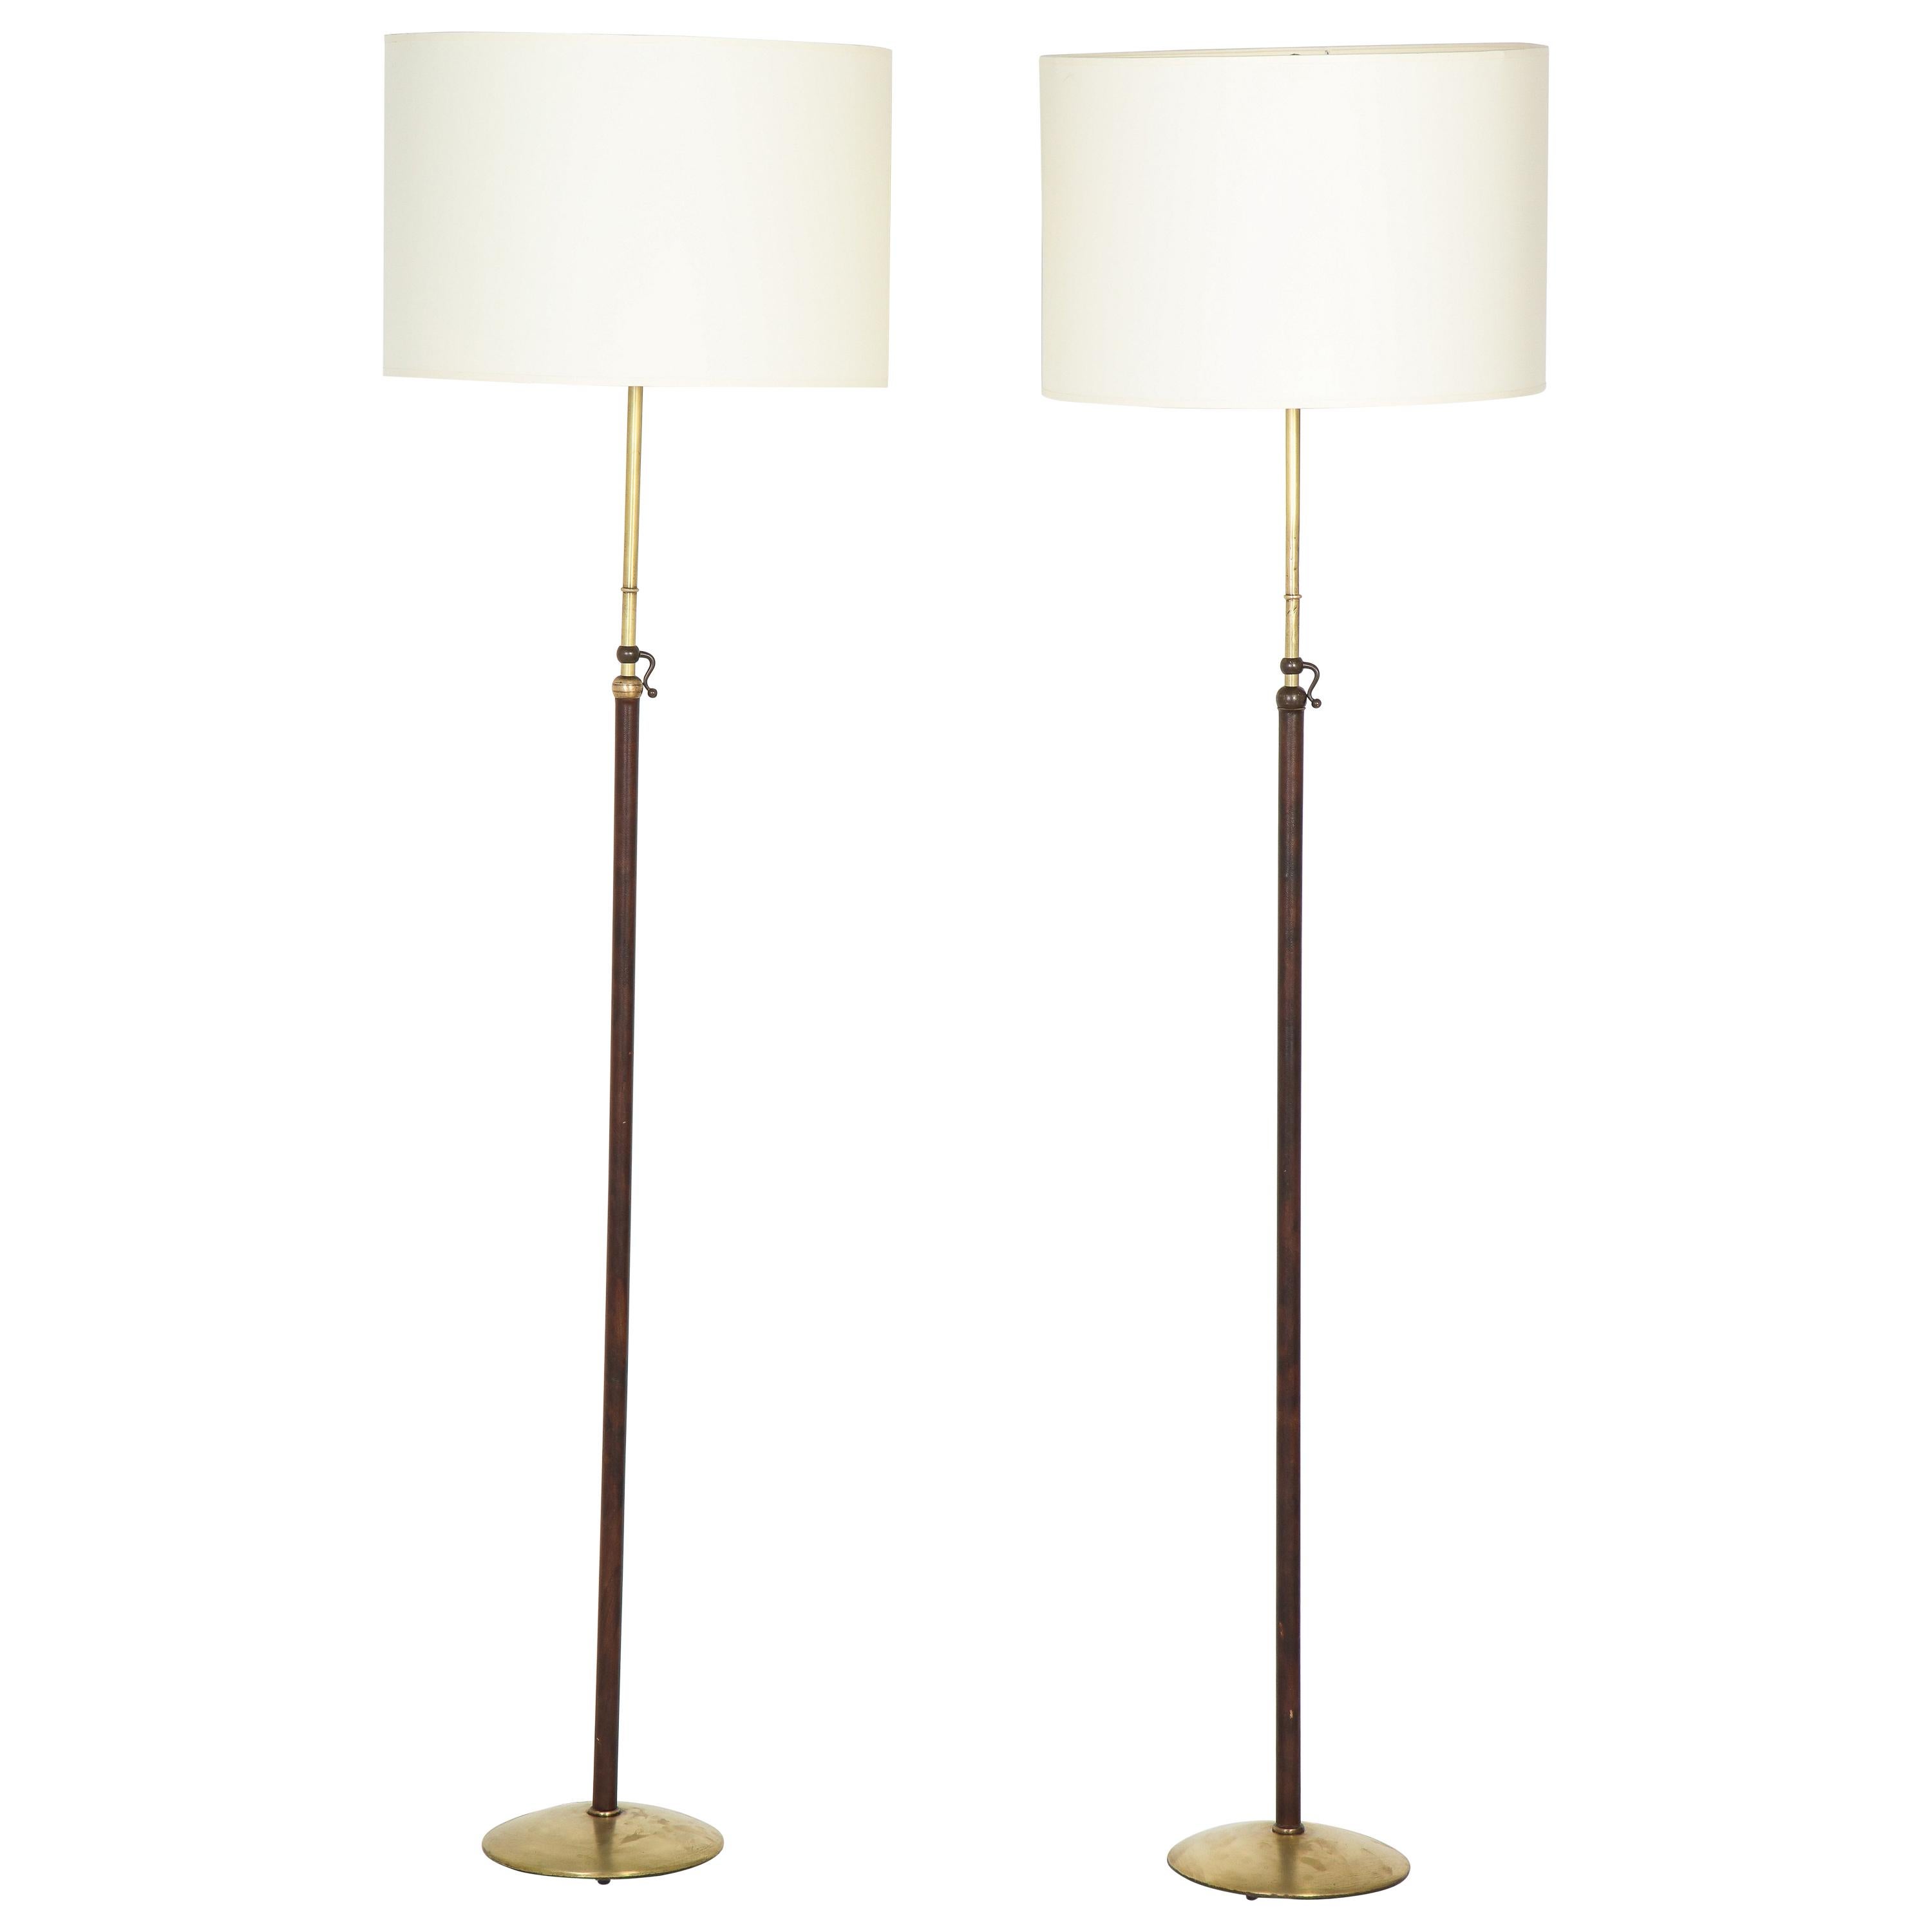 Pair of Adjustable Floor Lamps by Jacques Adnet For Sale